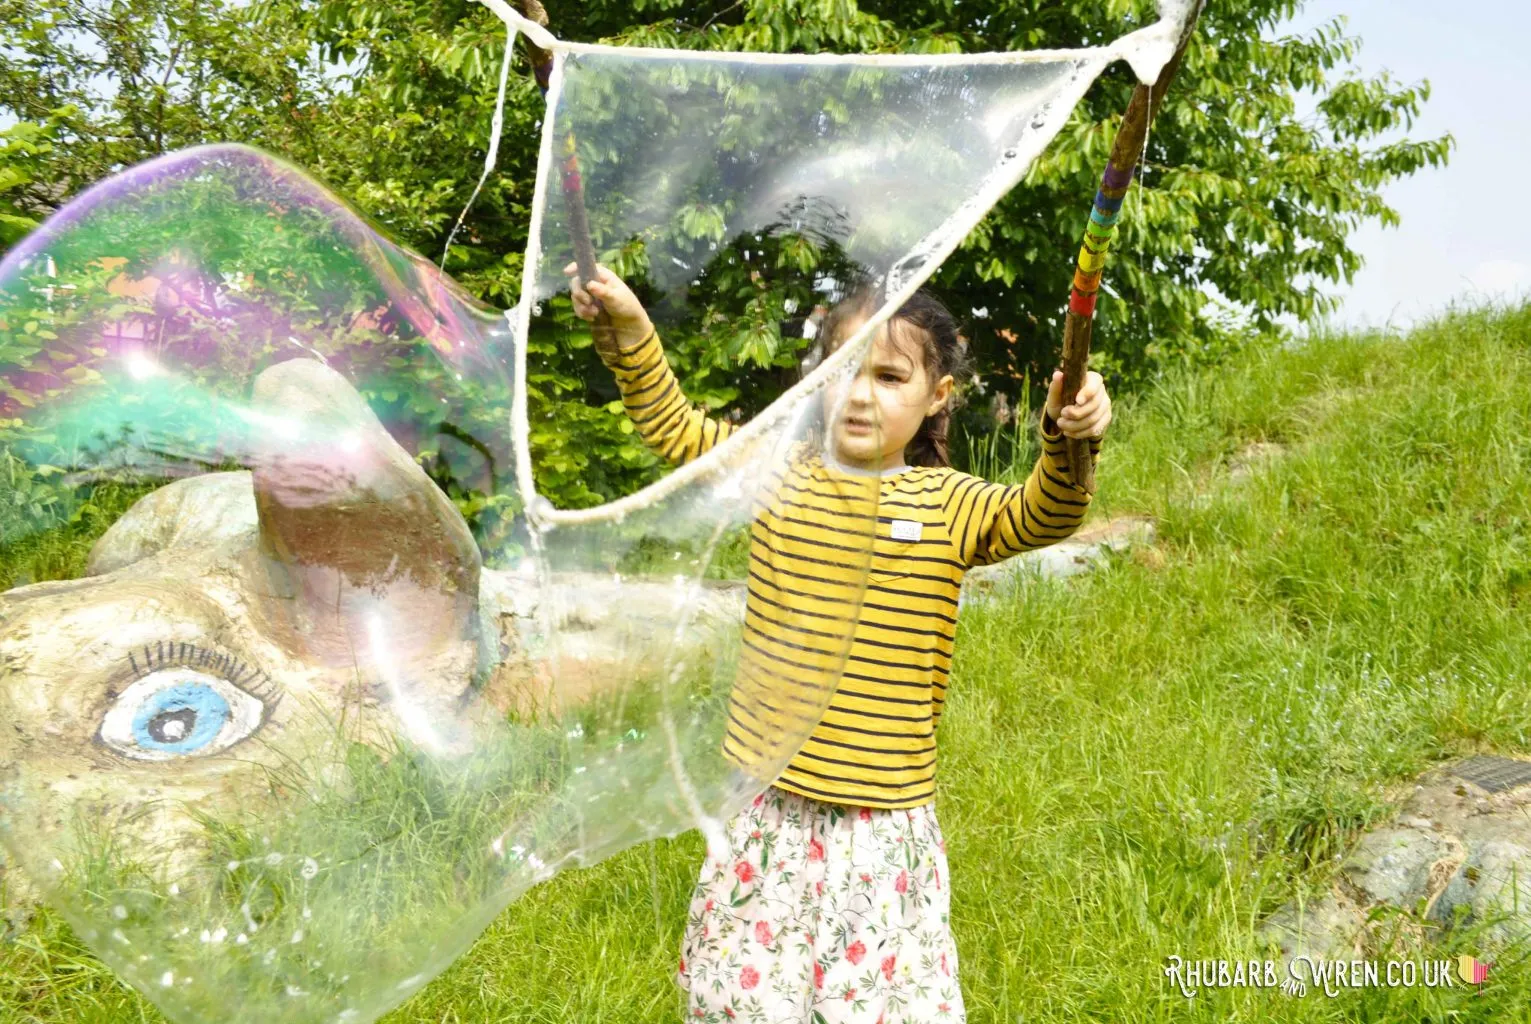 Child making bubbles with home-made giant bubble wand